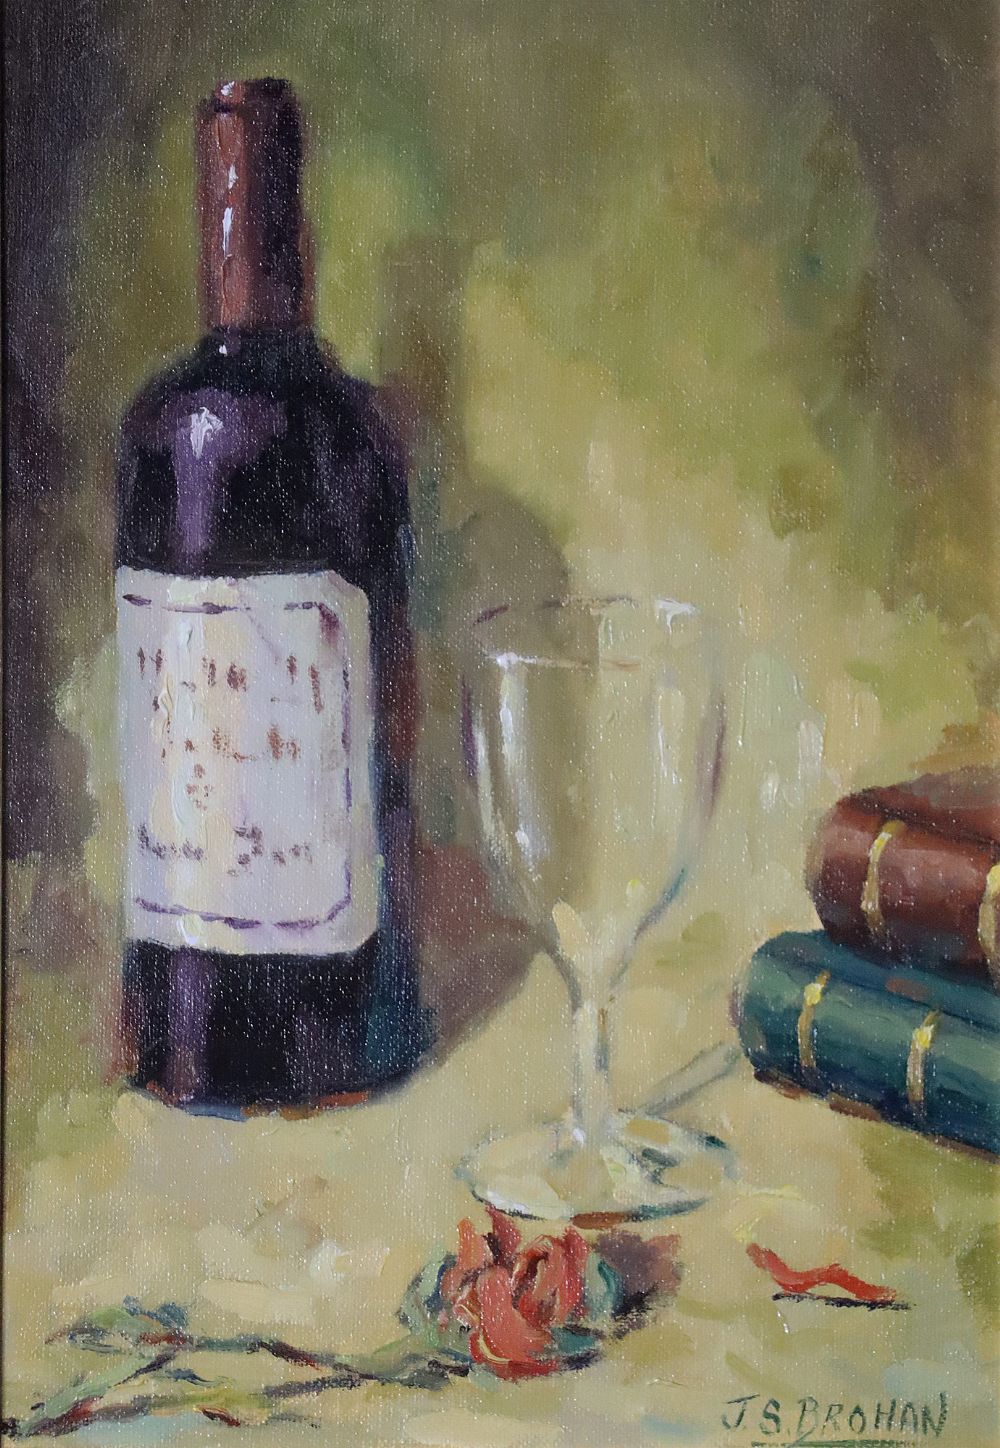 Lot 135 - STILL LIFE - WINE AND GLASS by James S. Brohan